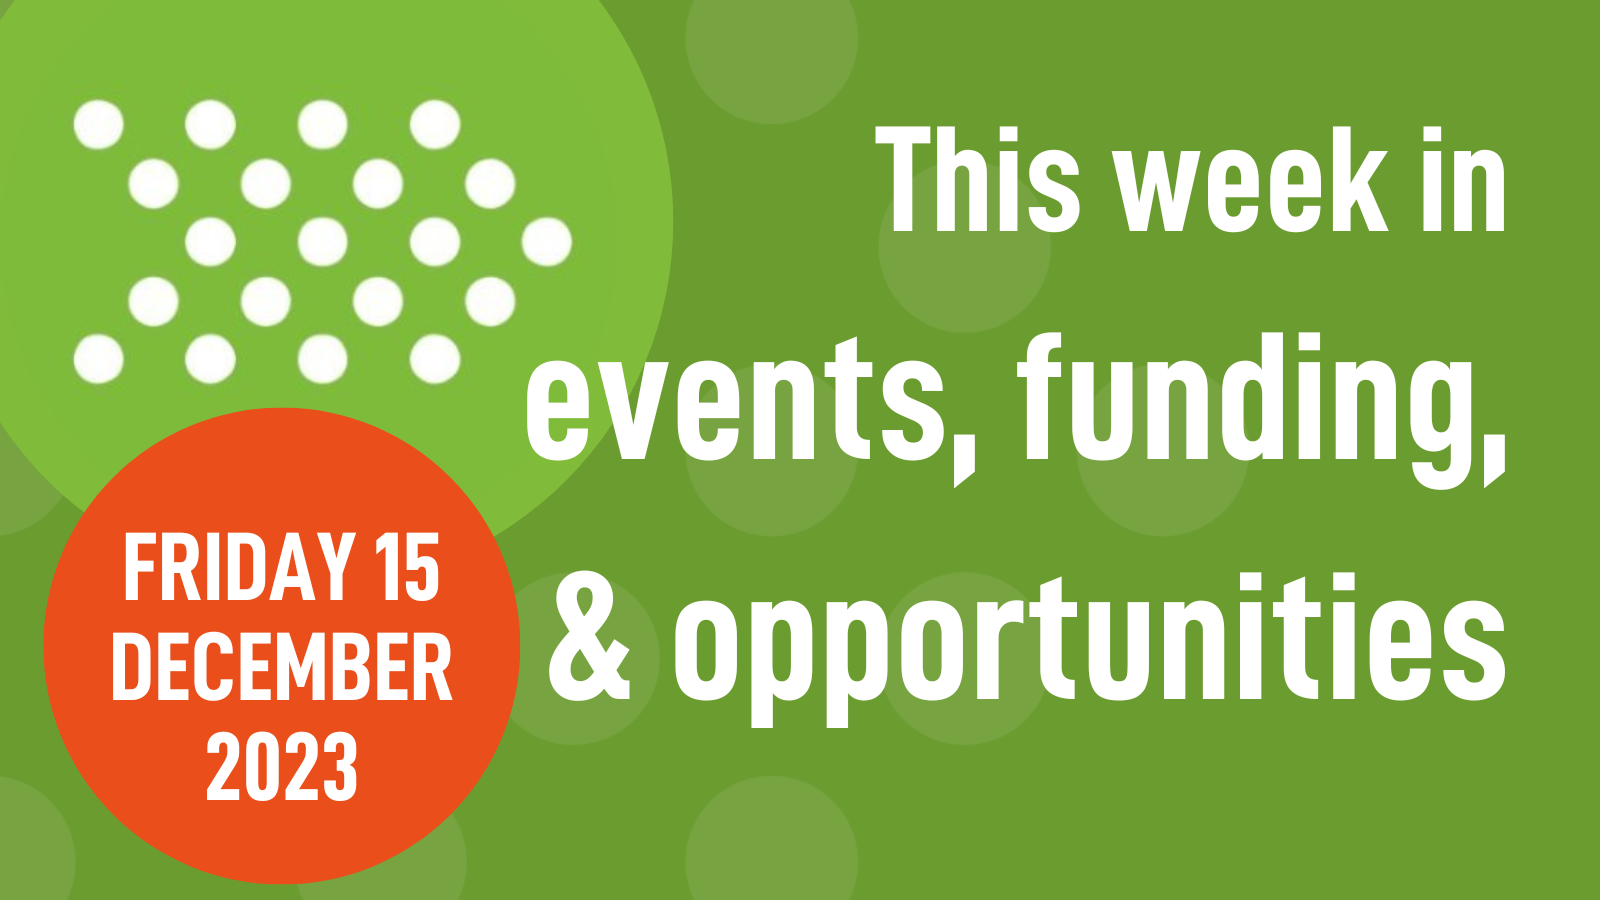 Weekly roundup 15/12/23: events, funding, & opportunities in mental health research